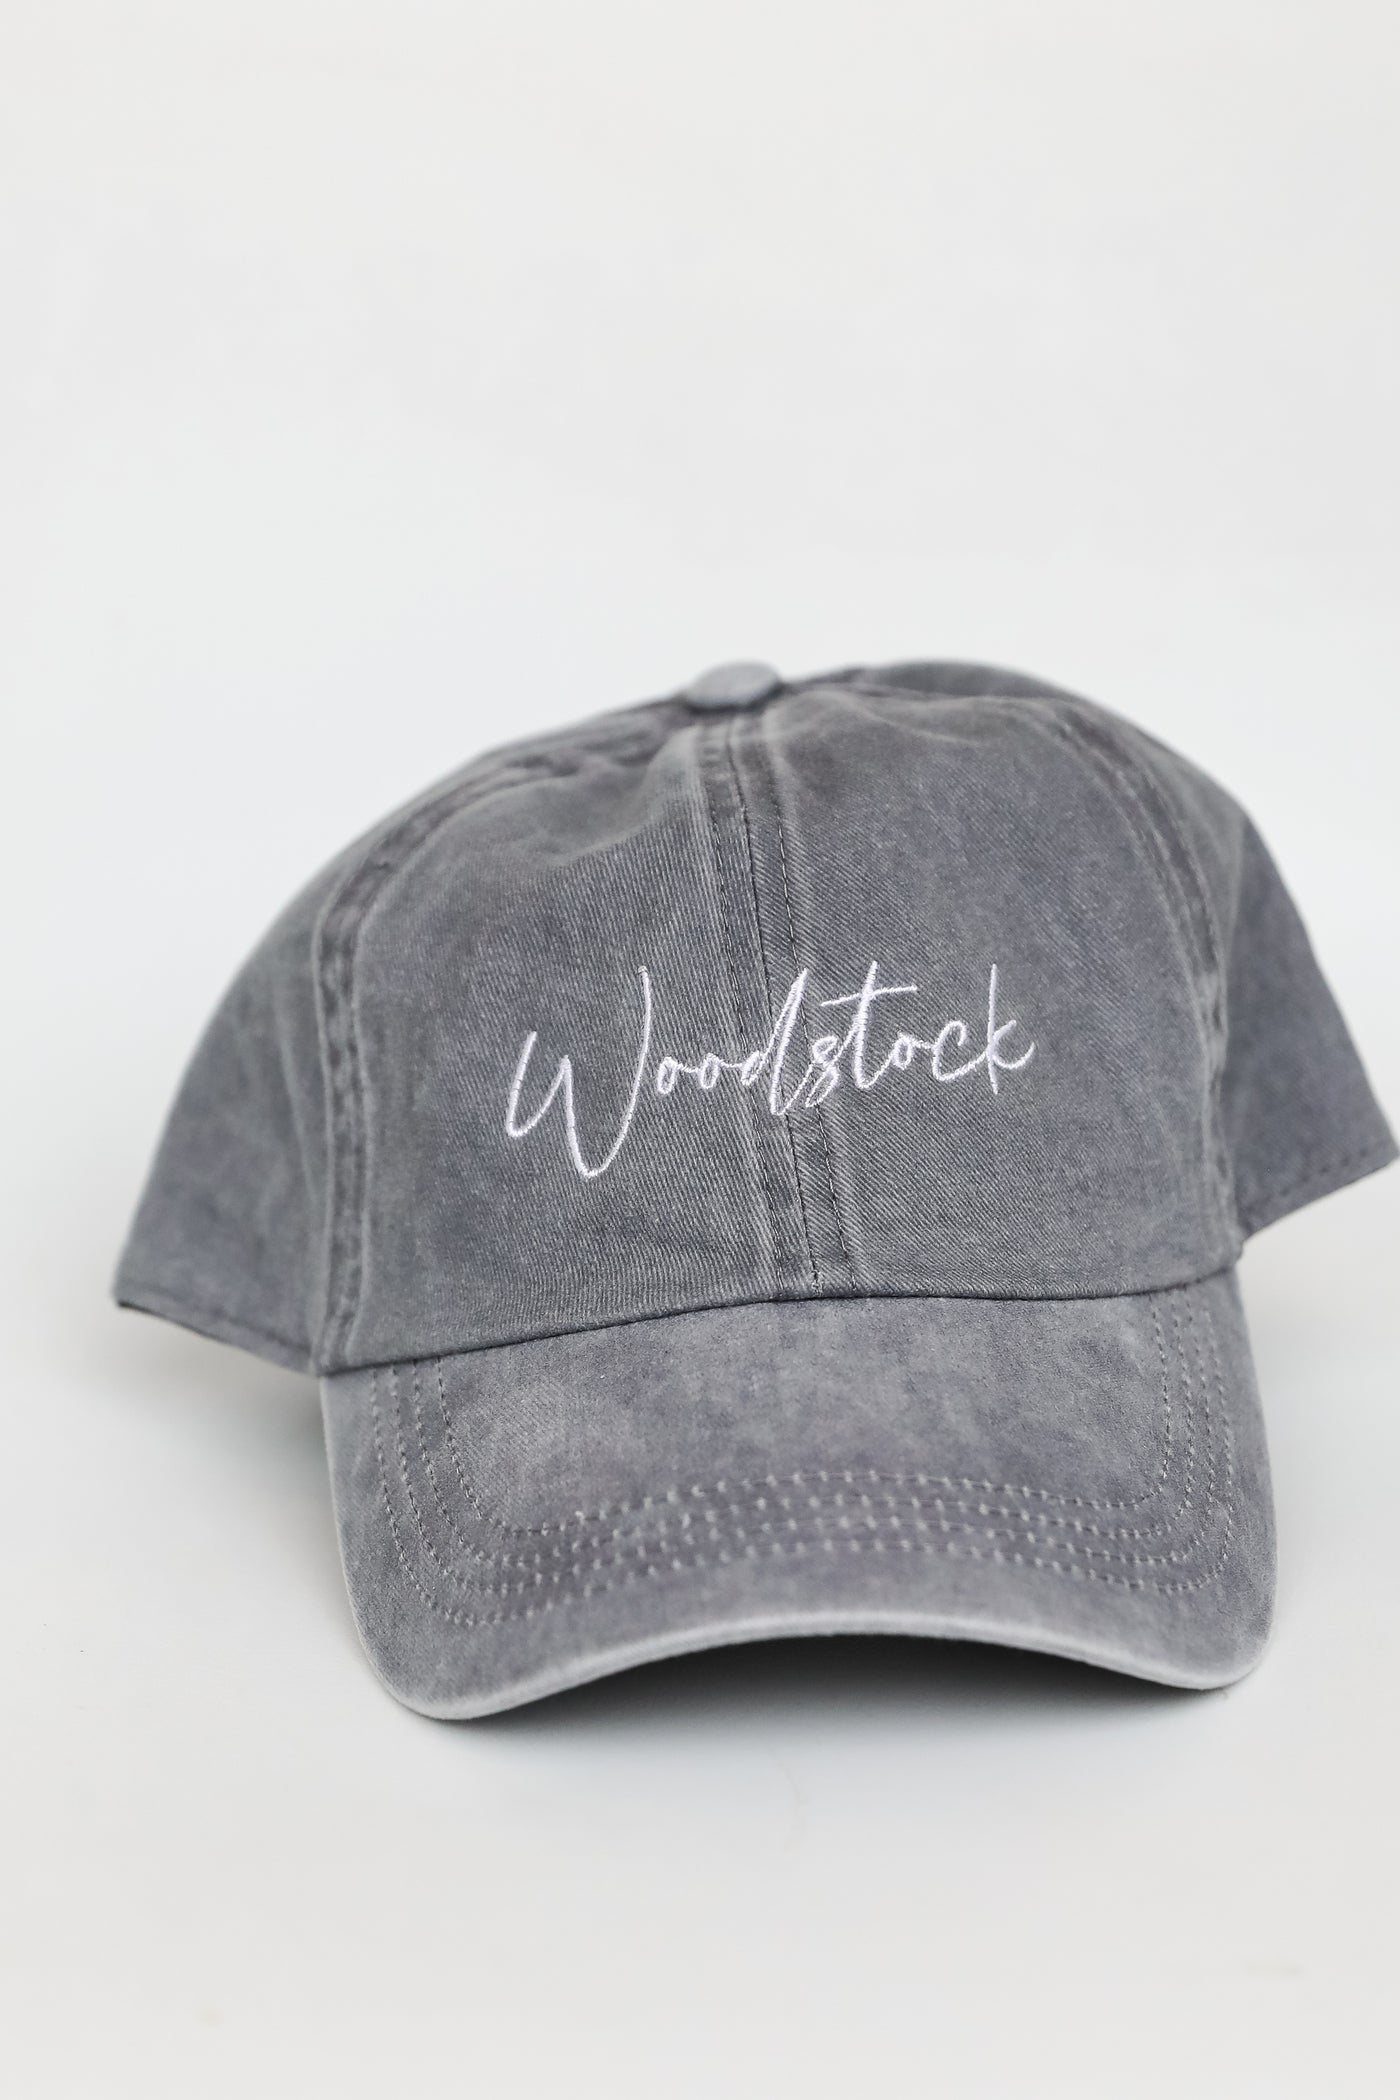 Woodstock Embroidered Hat flat lay